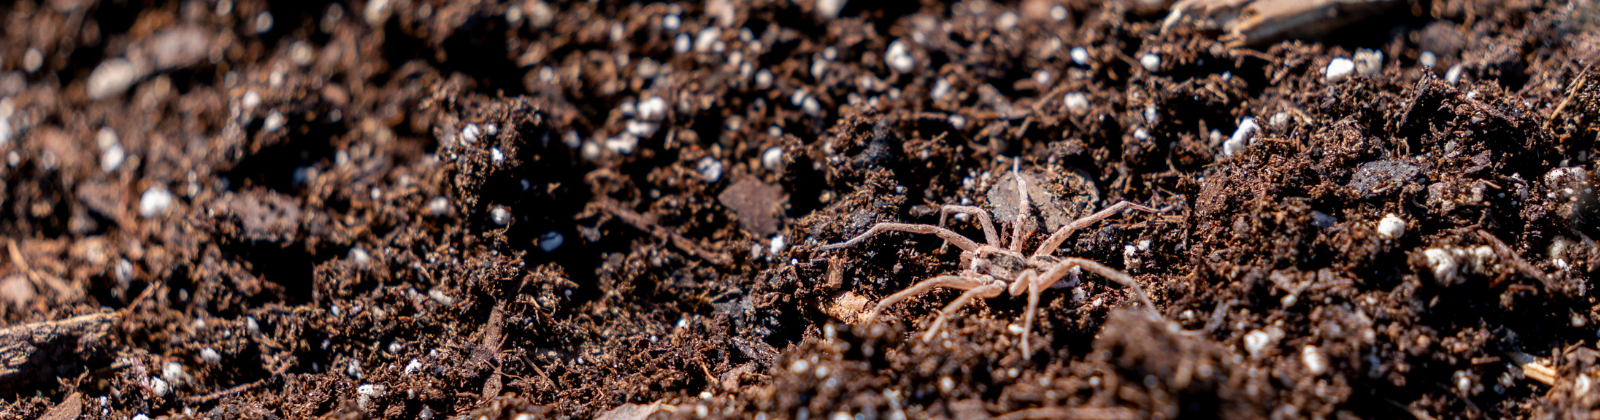 Close up photo of a spider in the soil